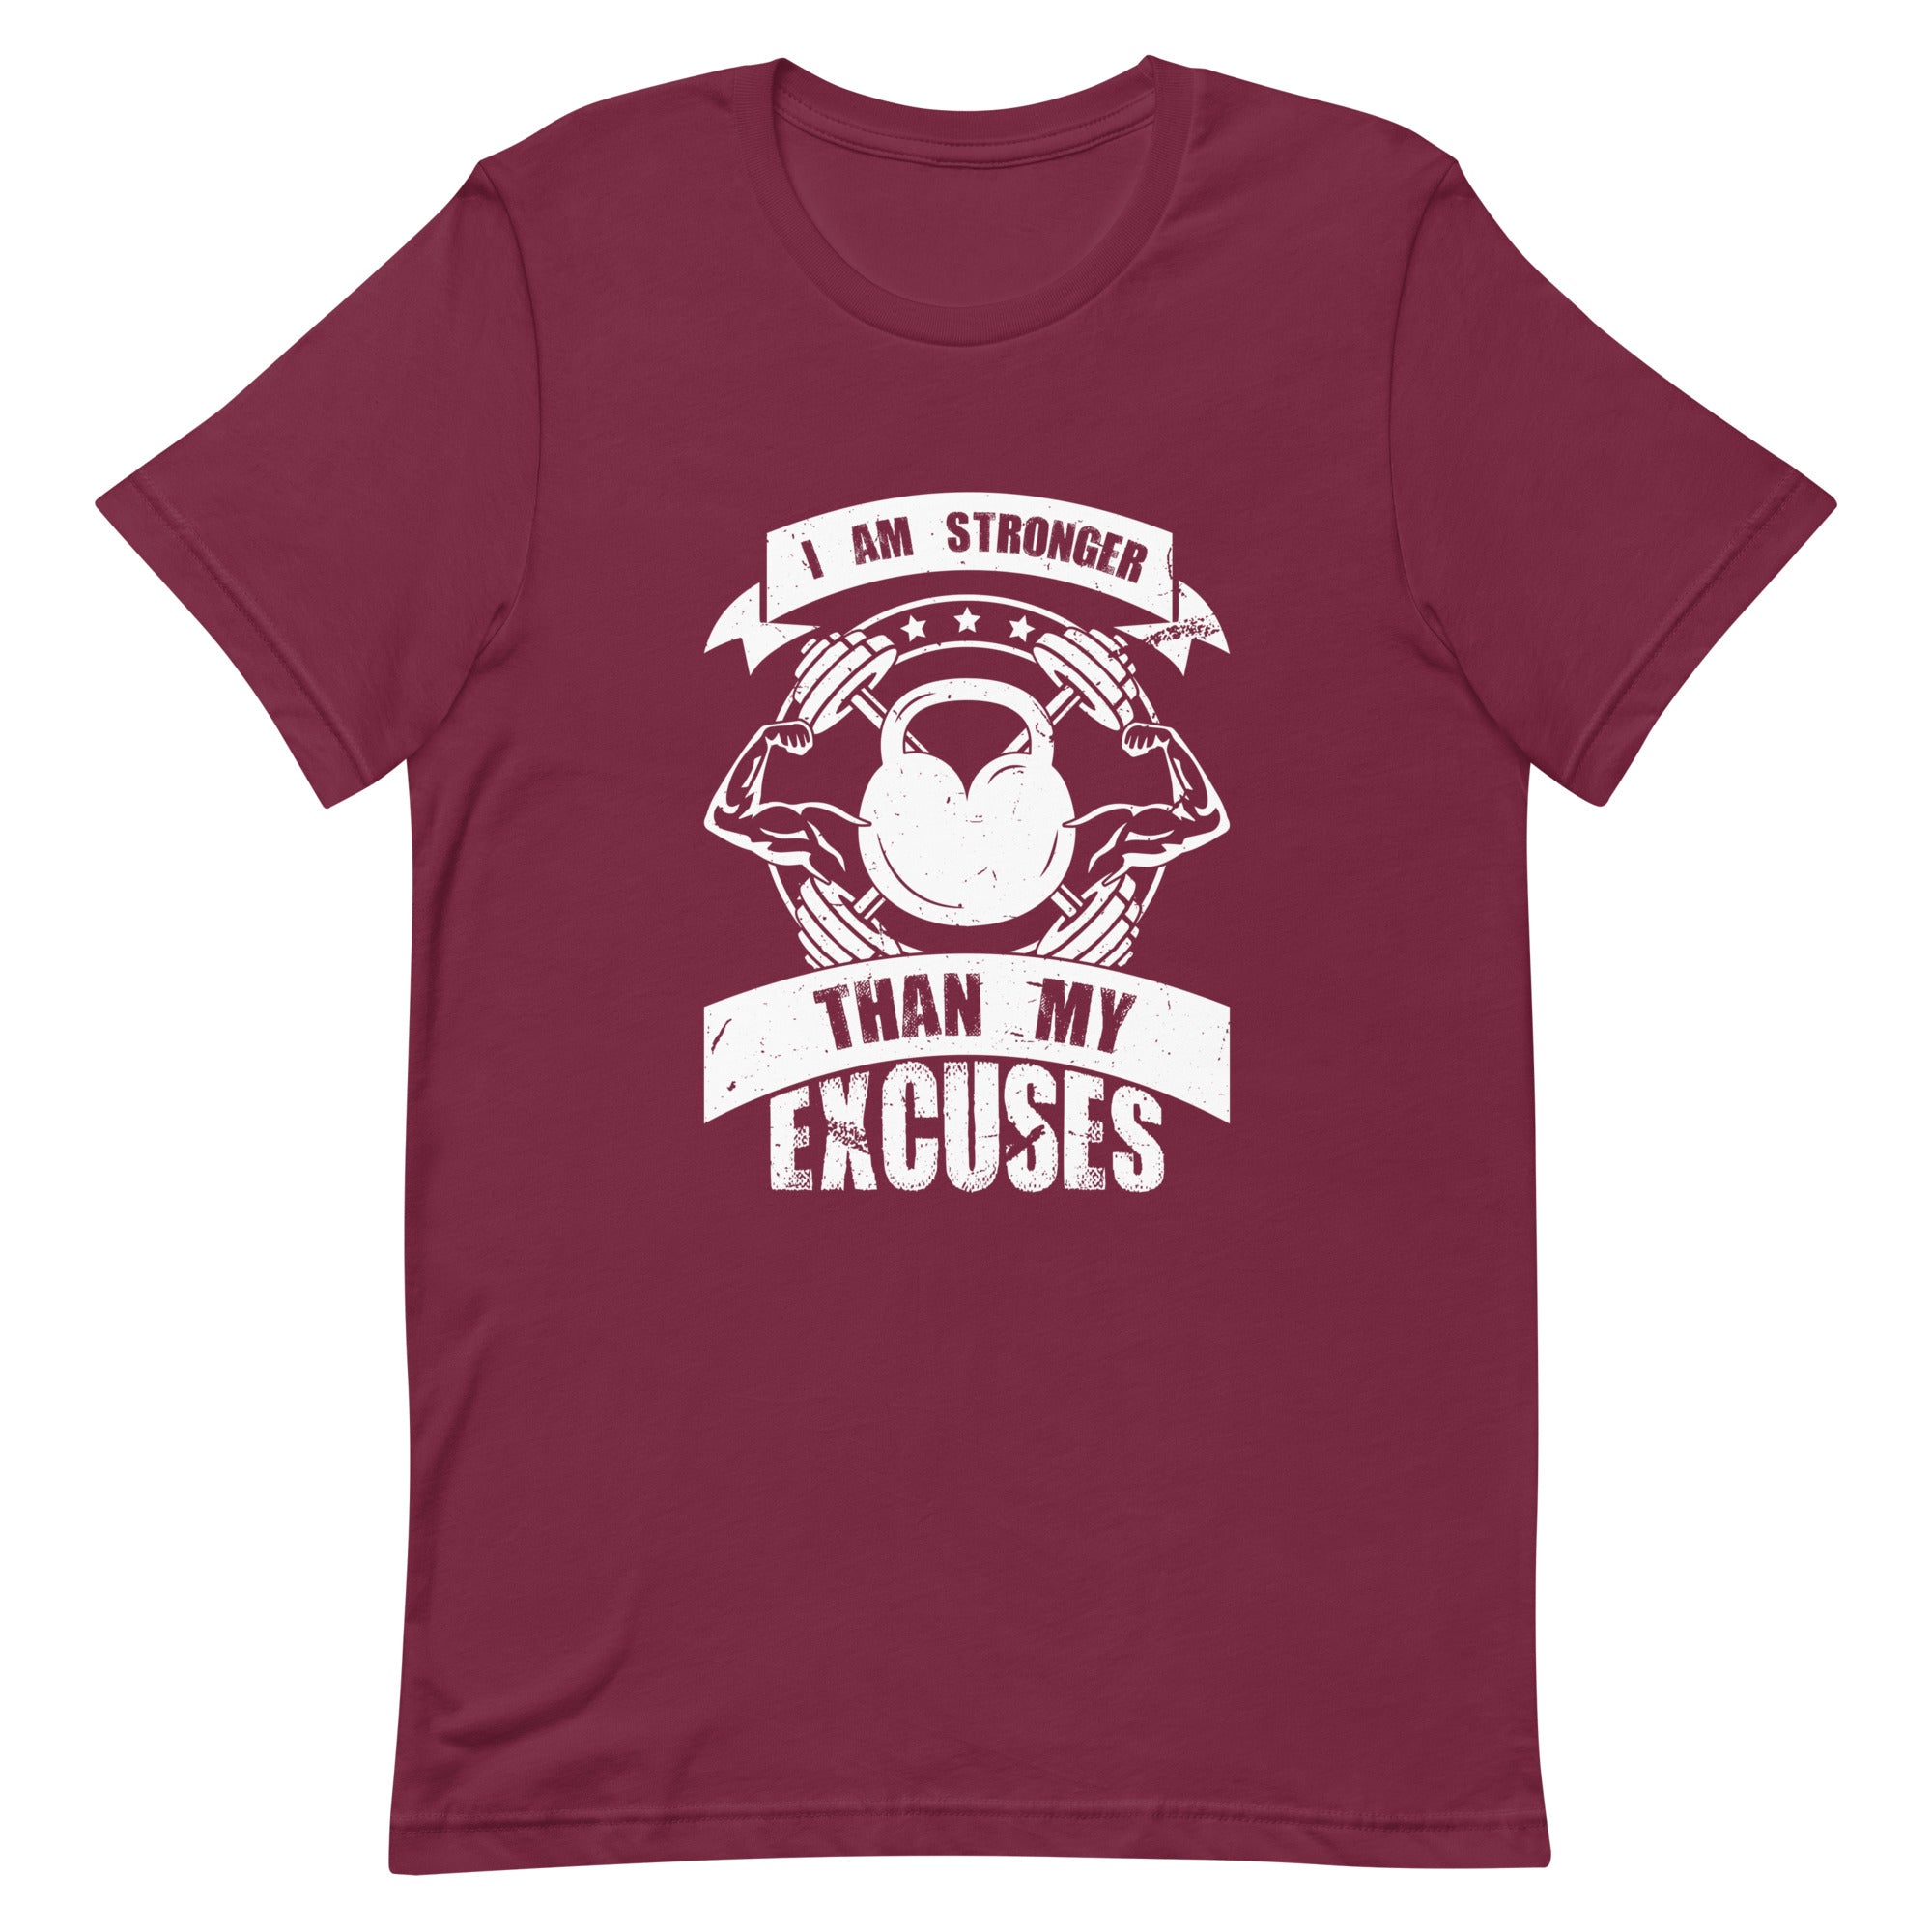 I Am Stronger Than My Excuses Fitness Training Gym Workout Quote Inspirational Motivational Men's T-Shirt